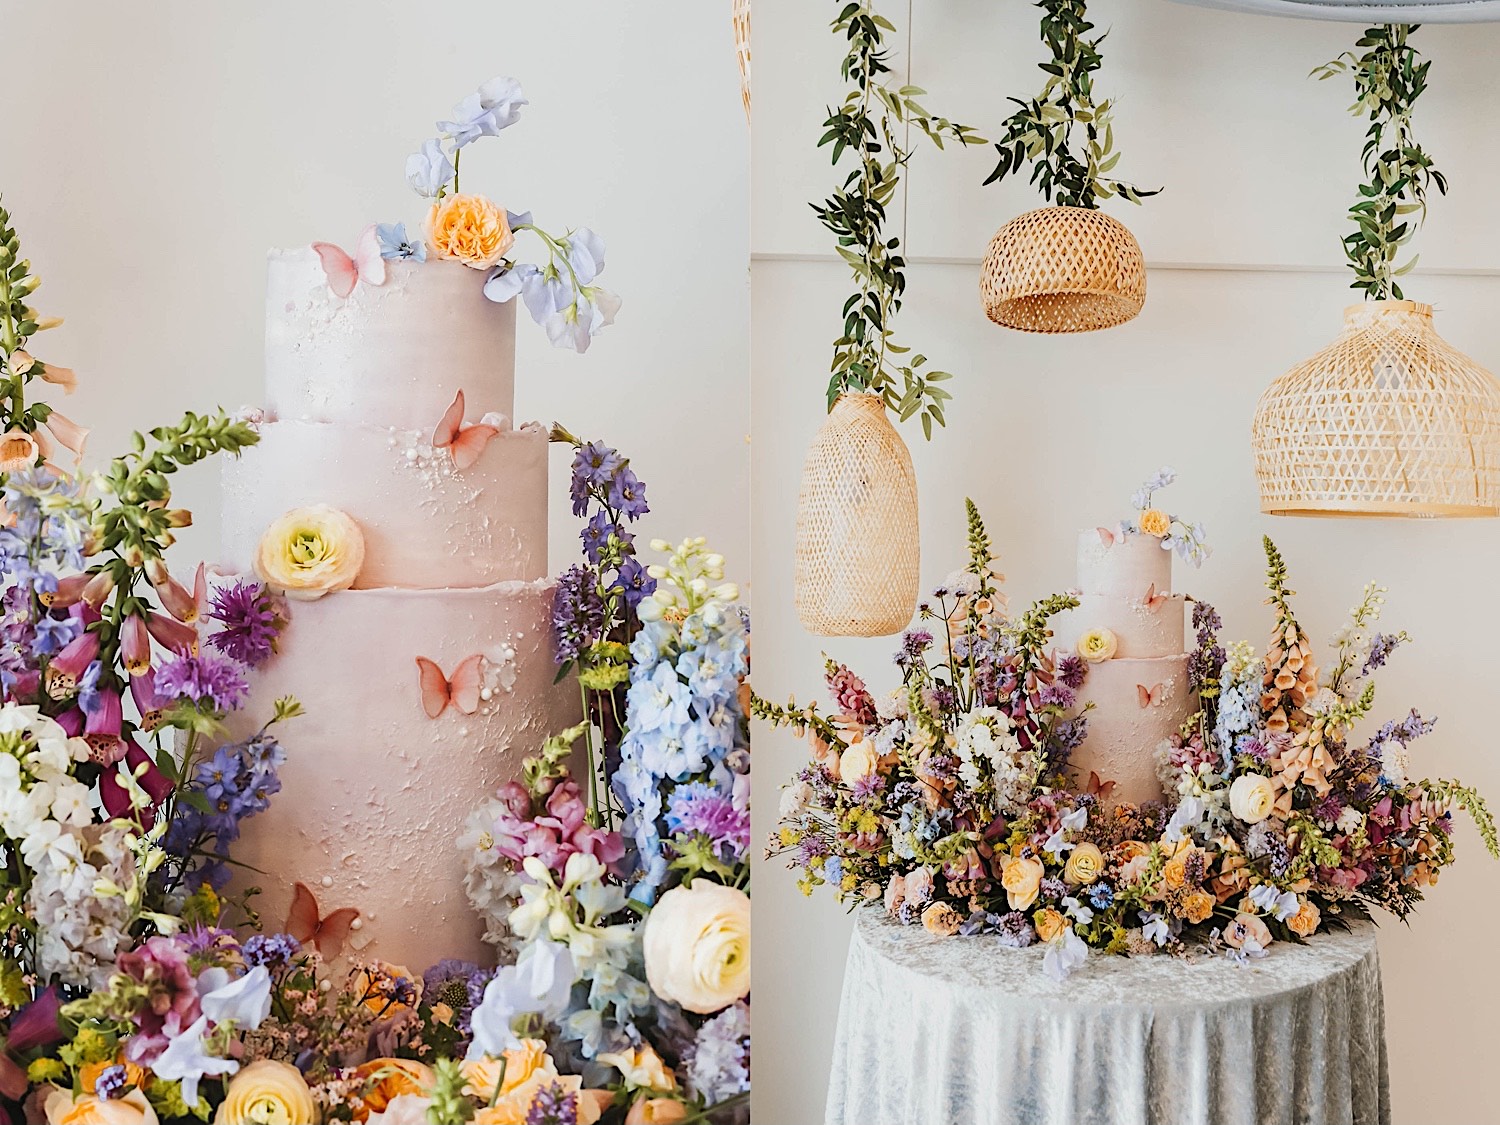 2 photos side by side of a wedding cake, the left is a close up while the right is taken further away